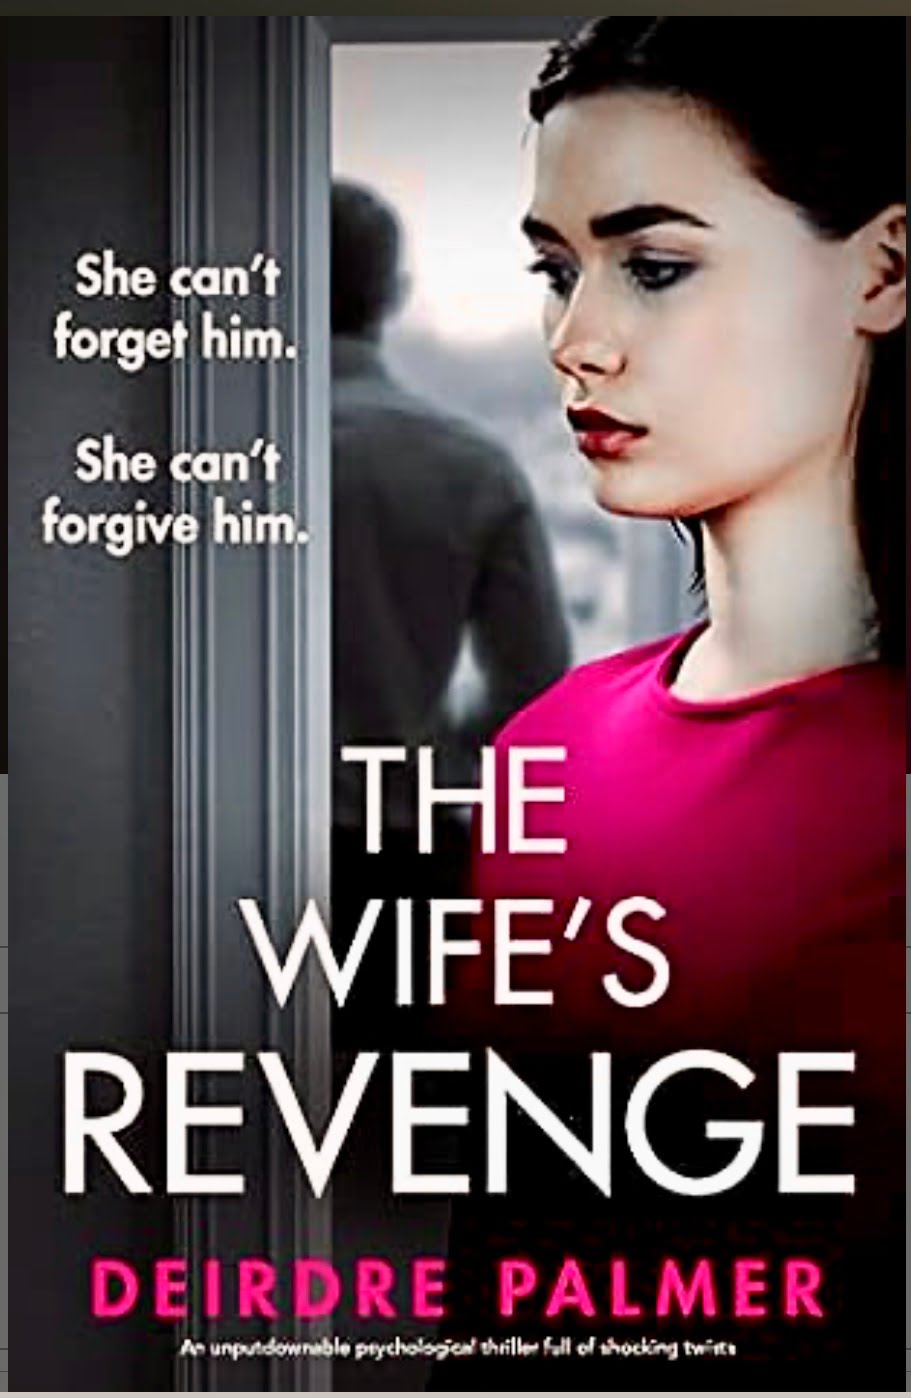 THE WIFE’S REVENGE BY DEIRDRE PALMER – BOOK REVIEW